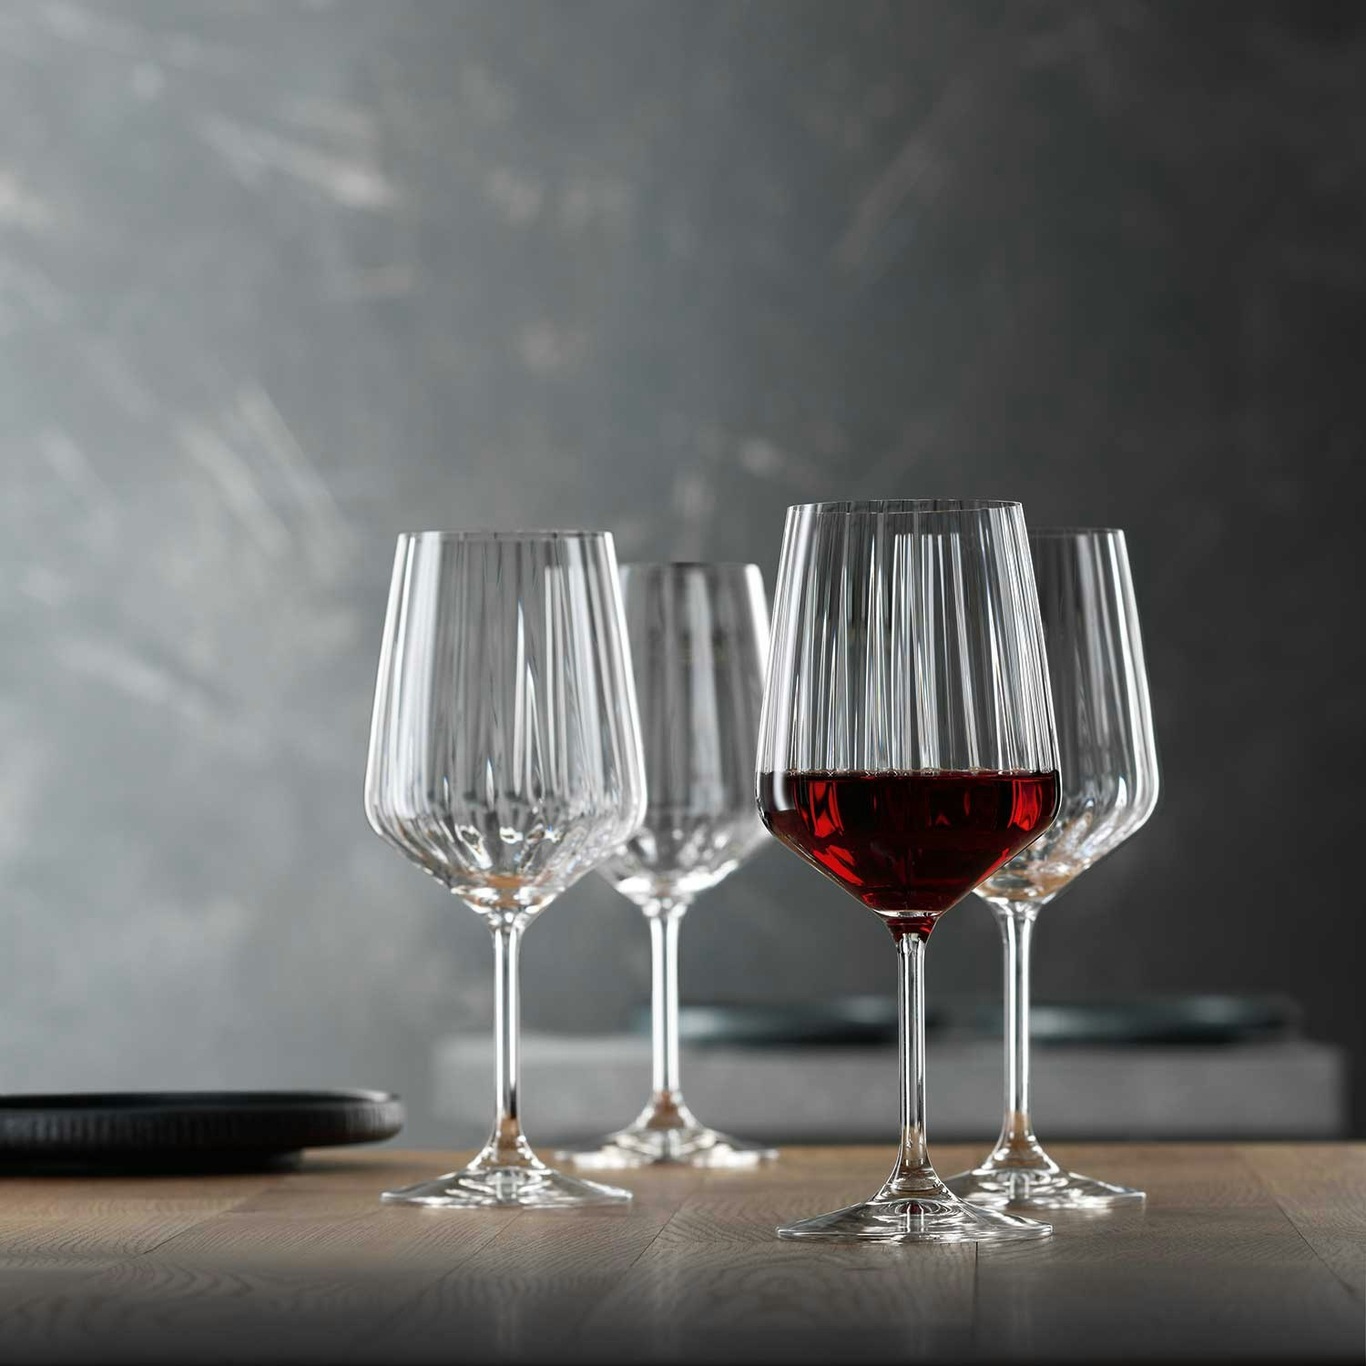 Pulse wine glass 46cl 4-pack